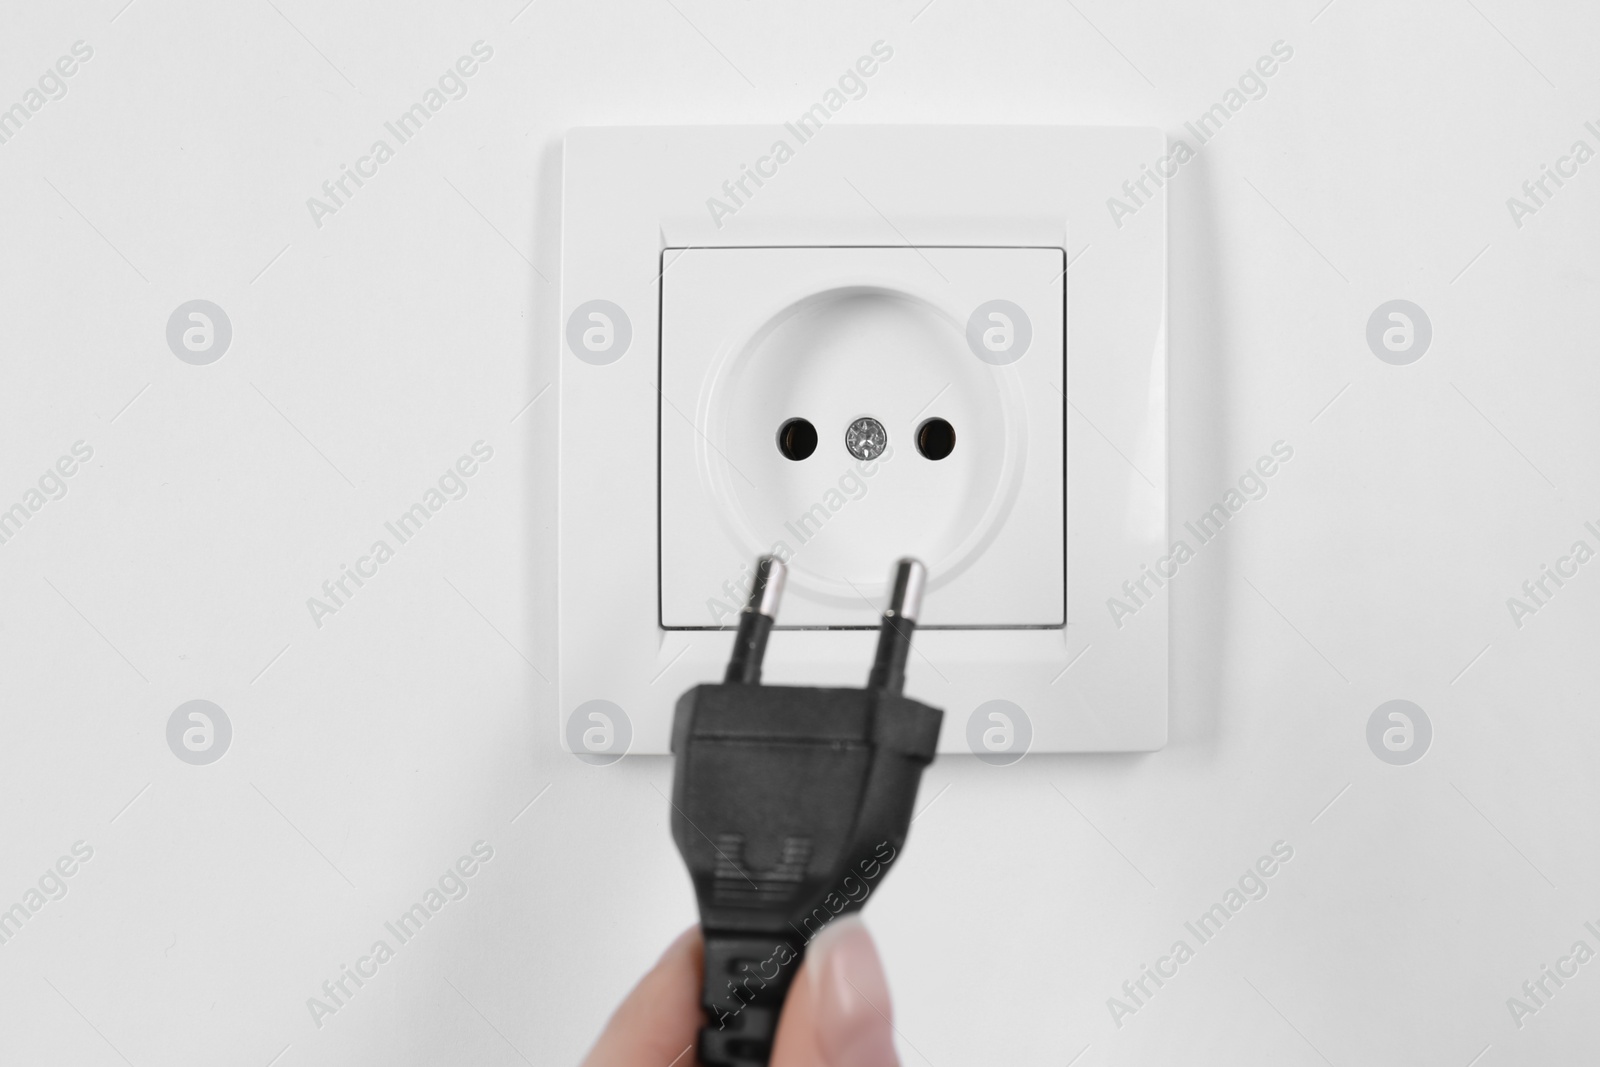 Photo of Woman putting plug into power socket on white background, closeup. Electrician's equipment